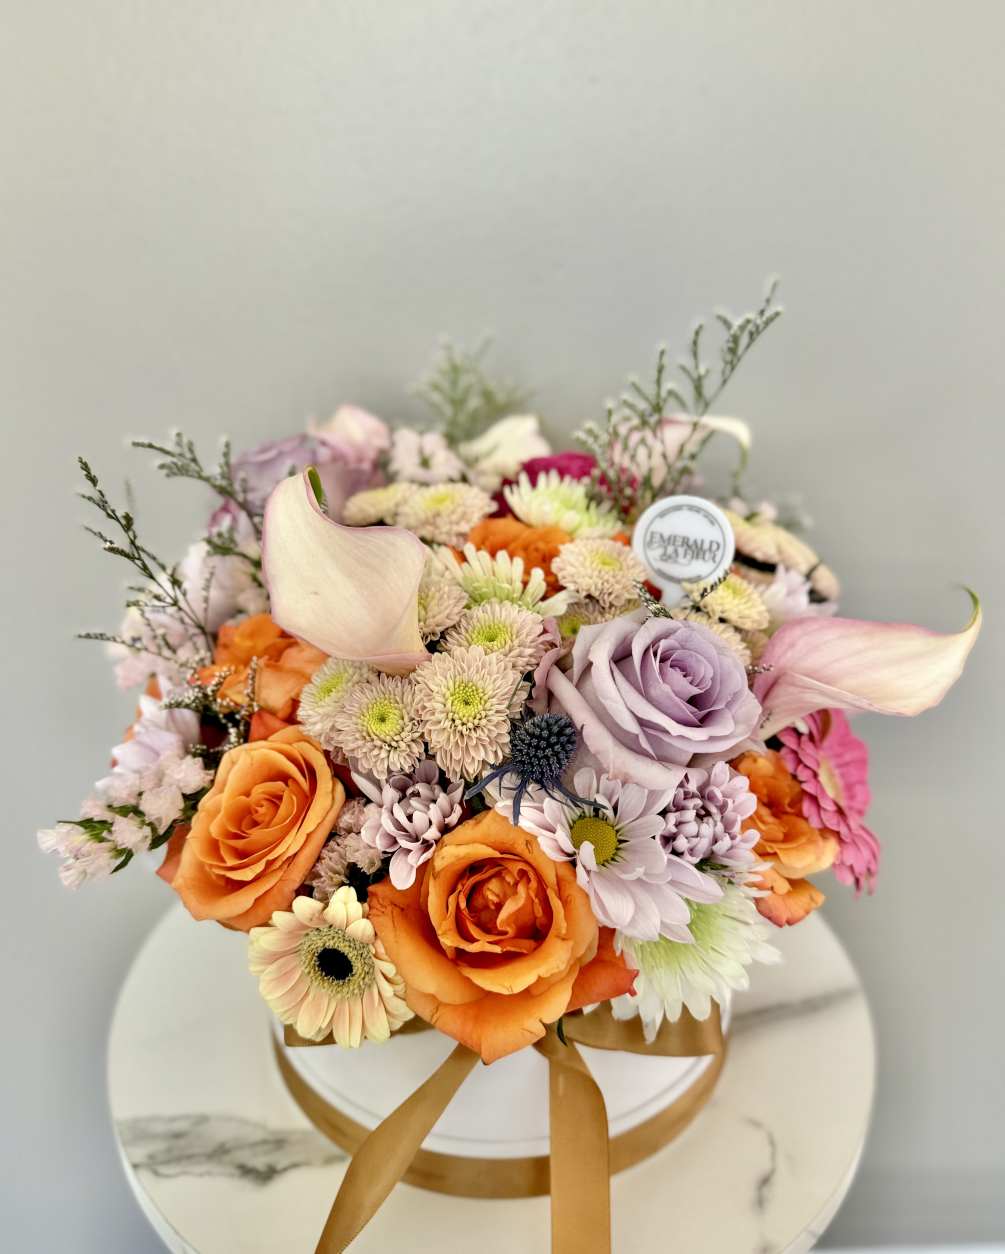 A beautiful mix of colors and flowers specially selected by the Florist.